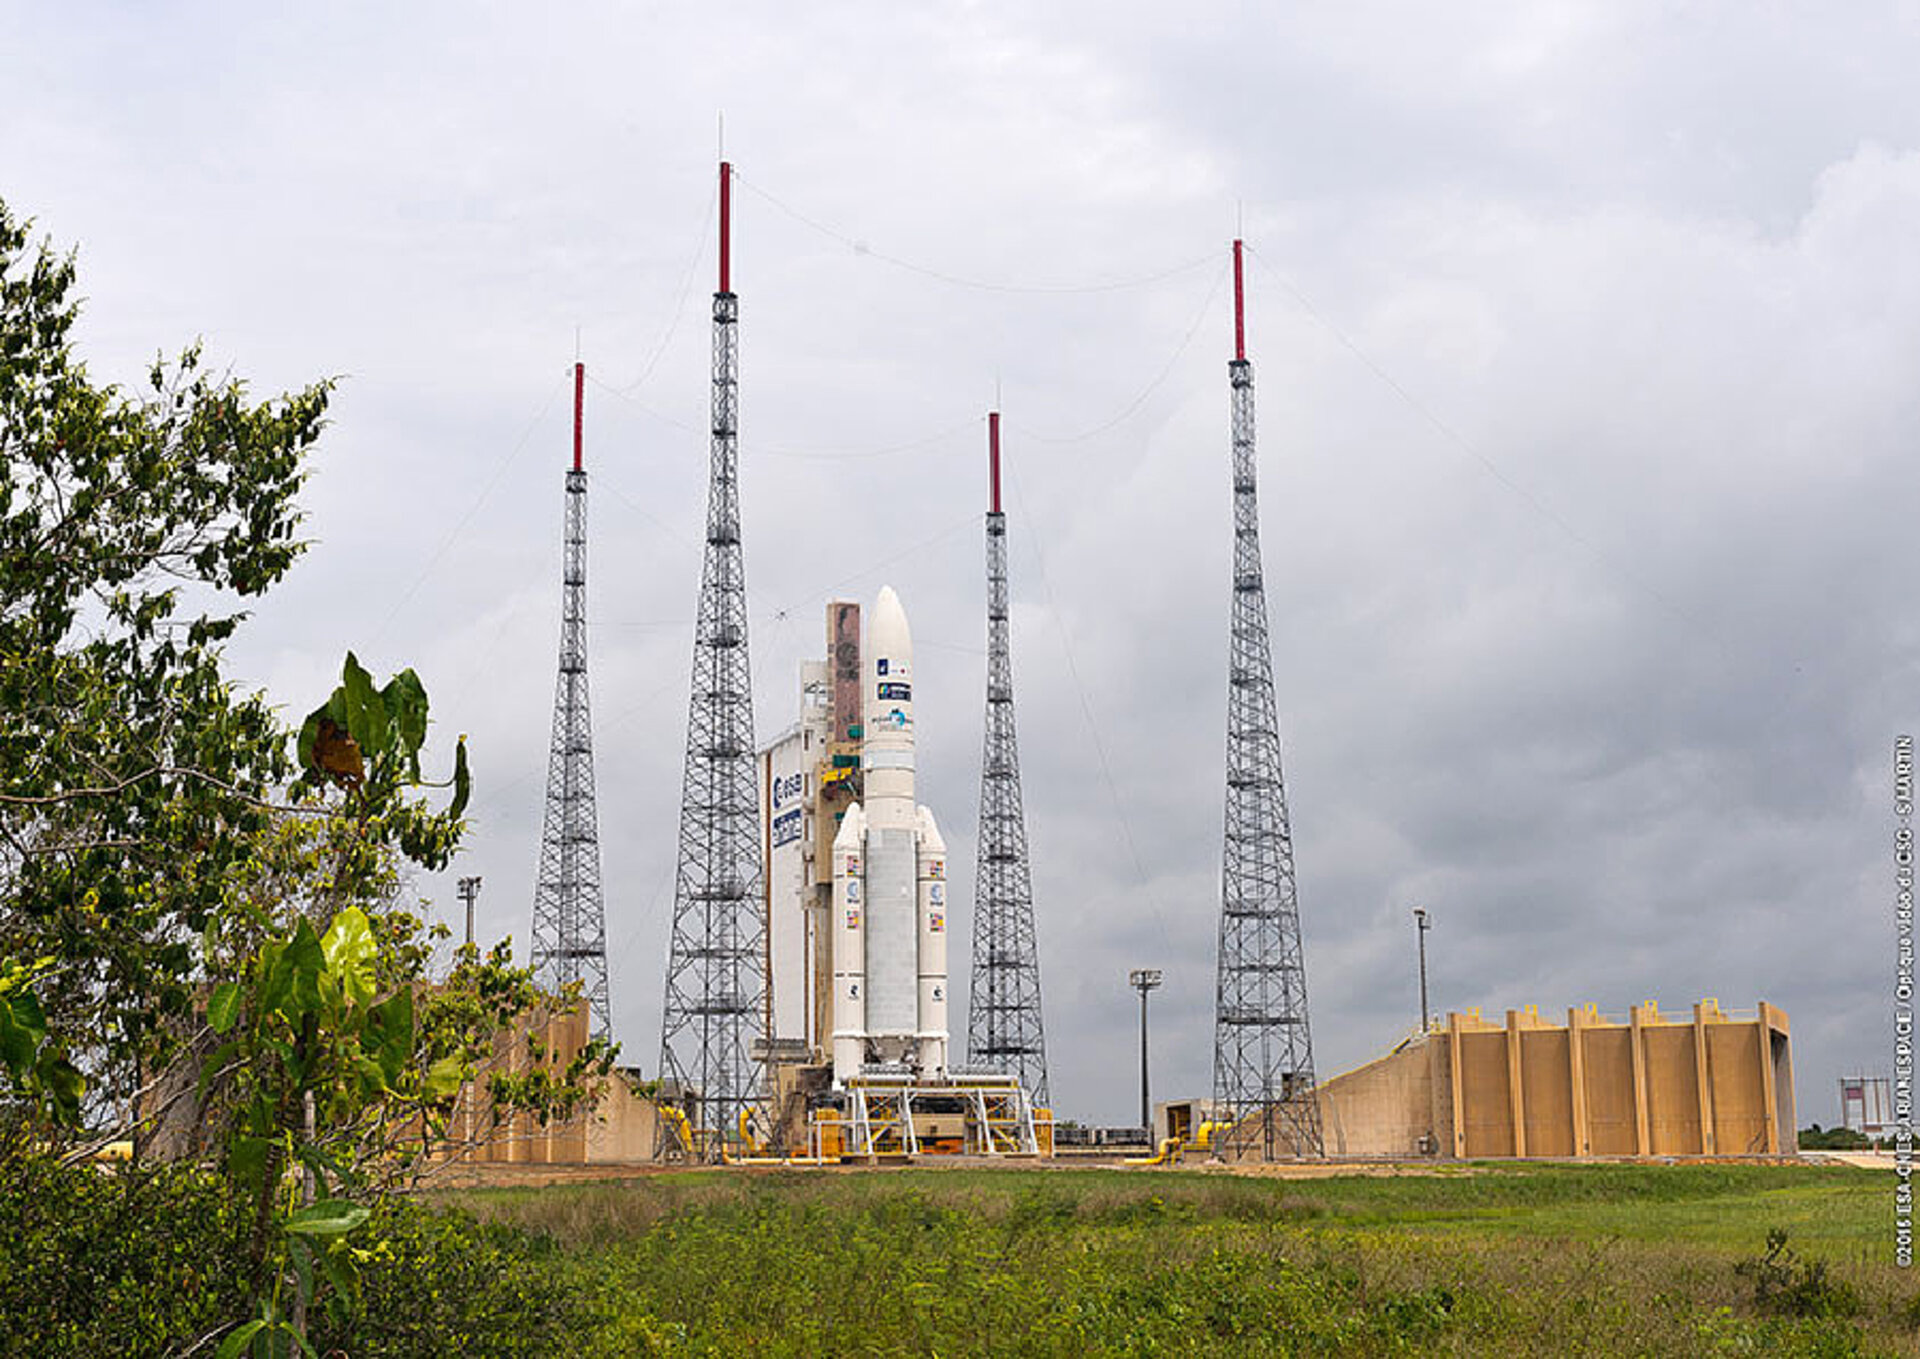 MSG-4 on the launch pad